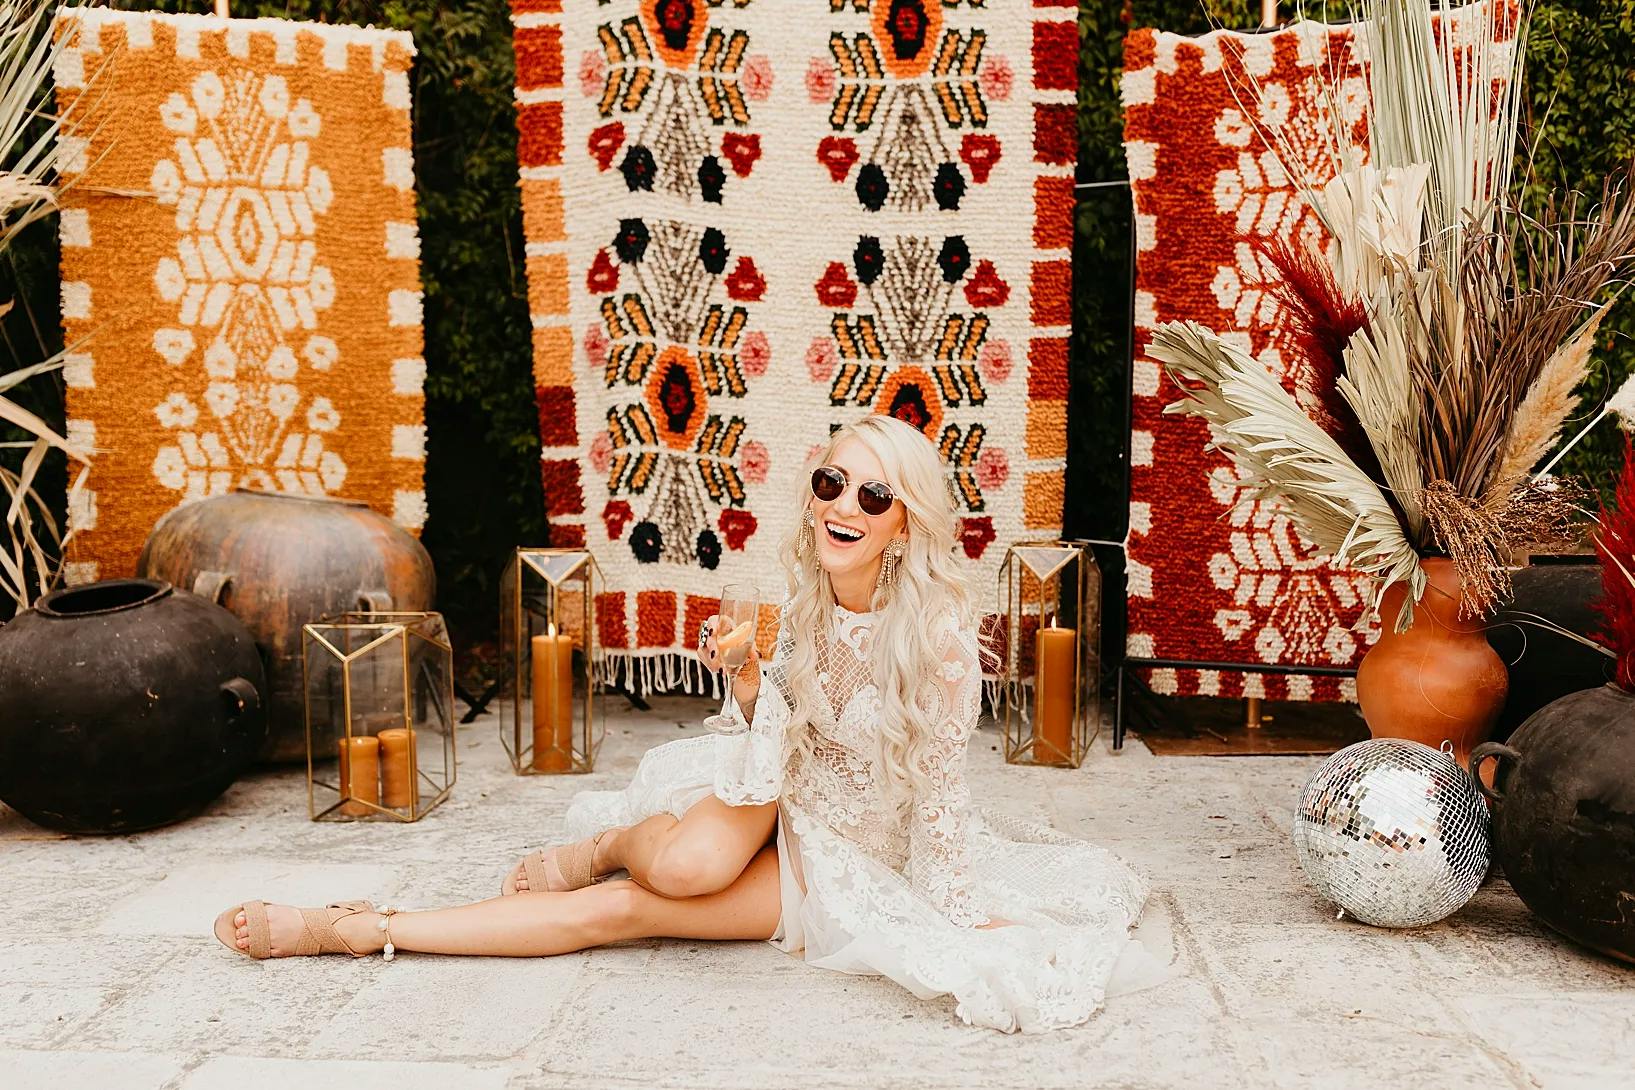 A woman with long blonde hair and sunglasses is sitting on the ground, smiling. She’s wearing a white lace outfit and holding a drink. Behind her are colorful, patterned rugs hanging against a green hedge, with vases, dried plants, and candles placed around her.